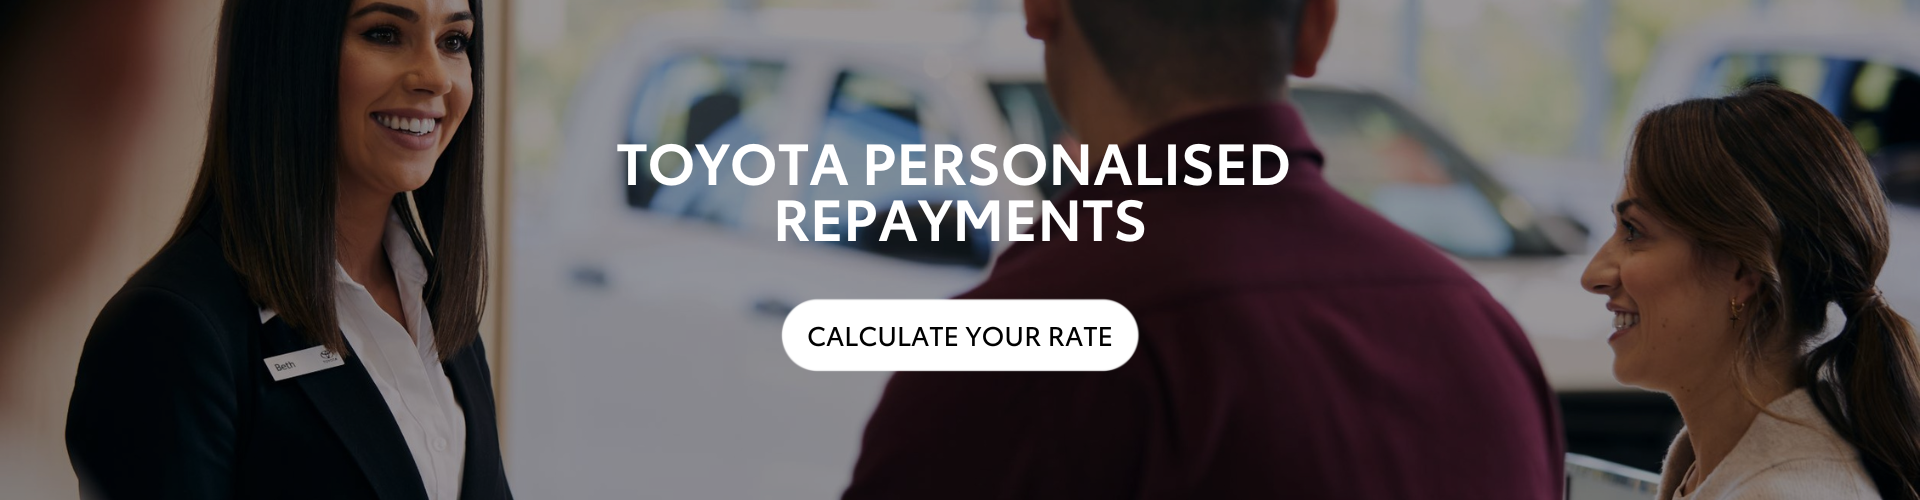 Calculate your Toyota Personalised Repayments